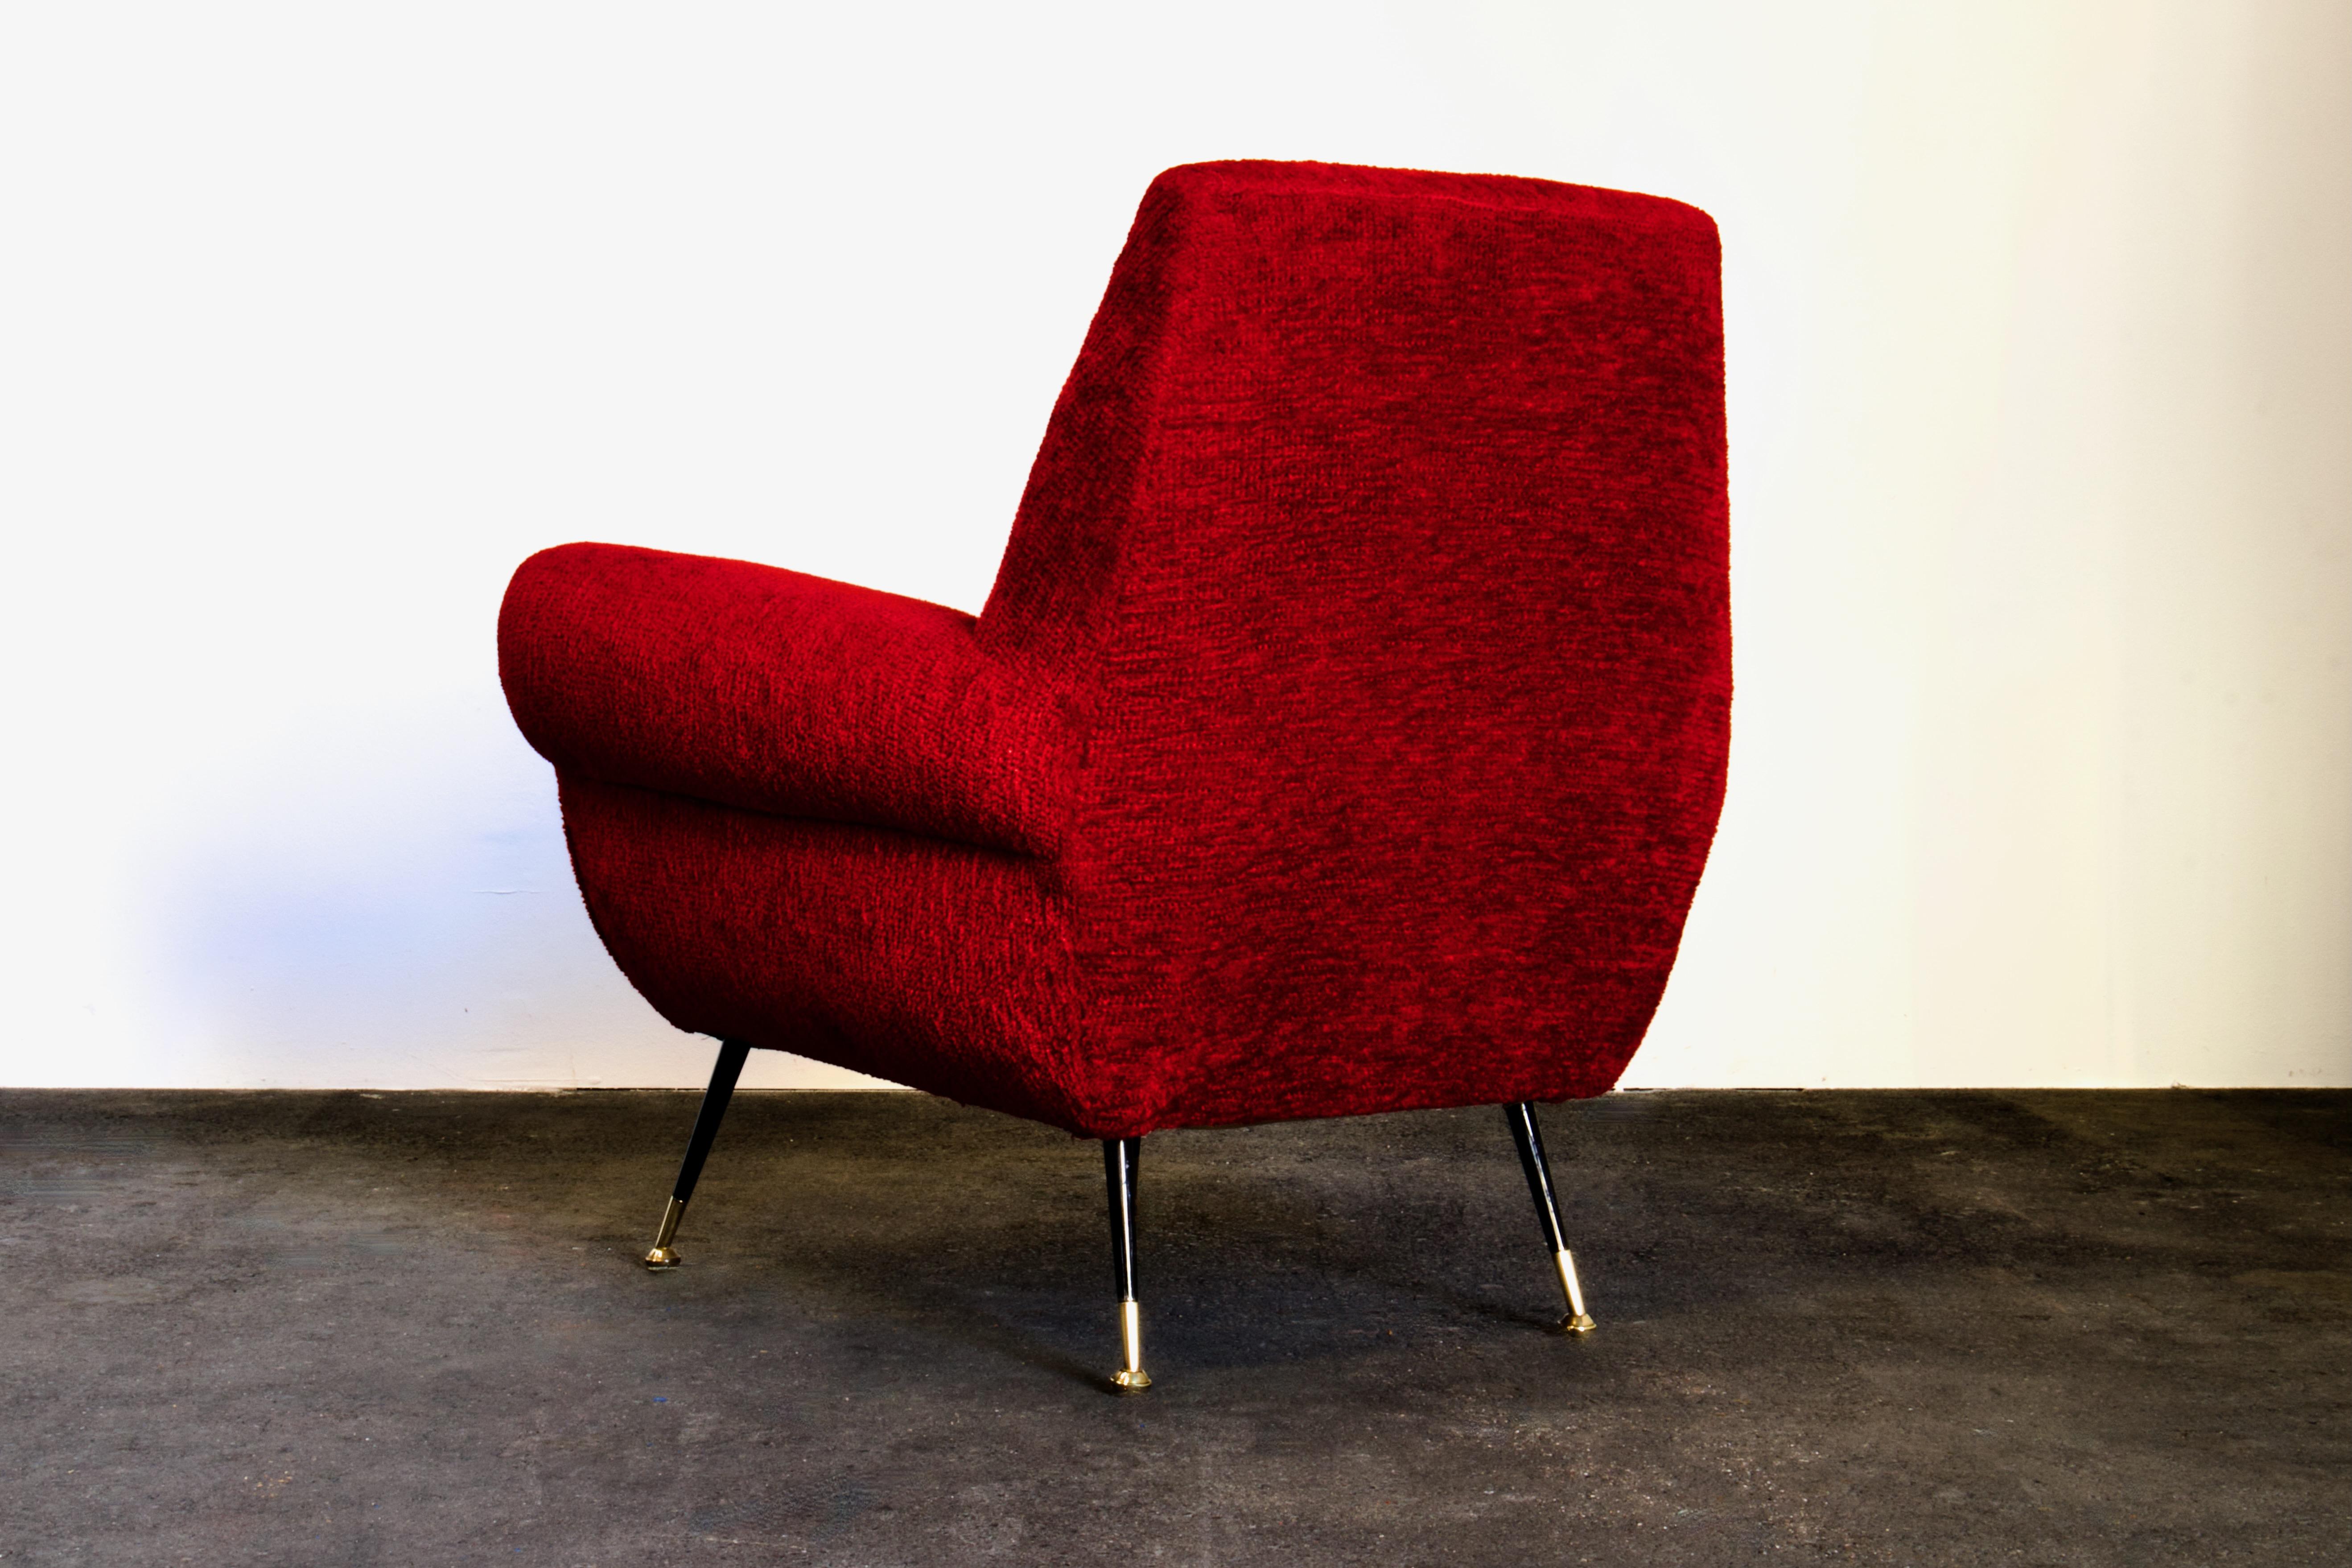 Mid-20th Century Pair of Gigi Radice Club / Lounge Armchairs for Minotti, 1950s Italy, Red Fabric For Sale